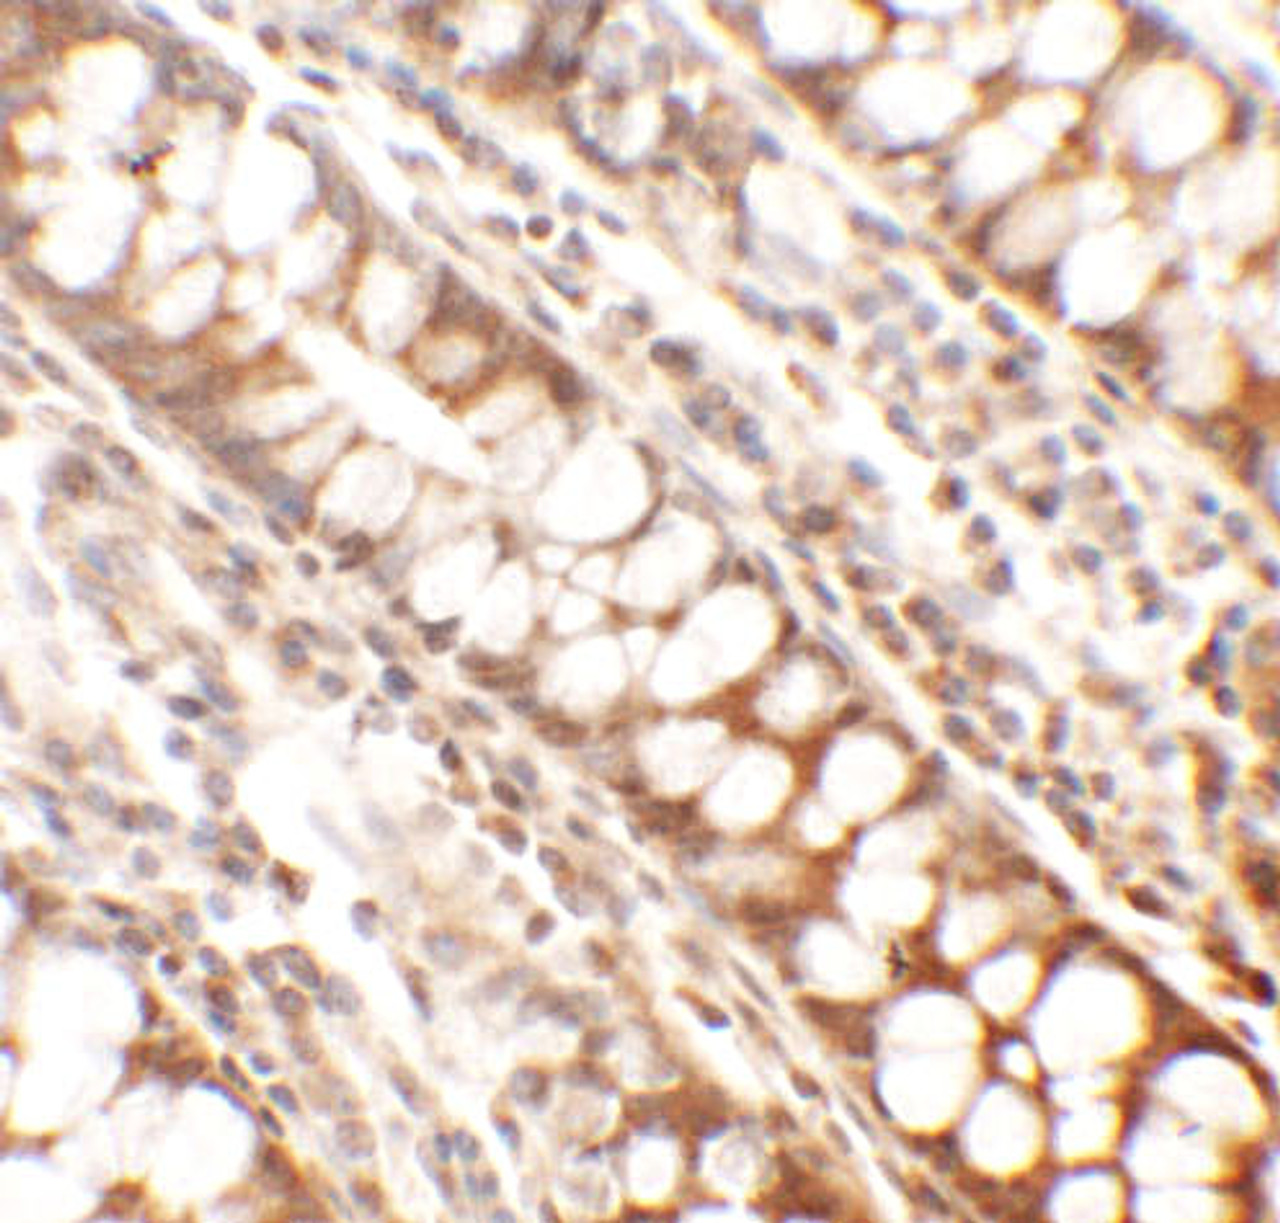 Immunohistochemistry of Periphilin in human colon tissue with Periphilin antibody at 2.5 ug/mL.